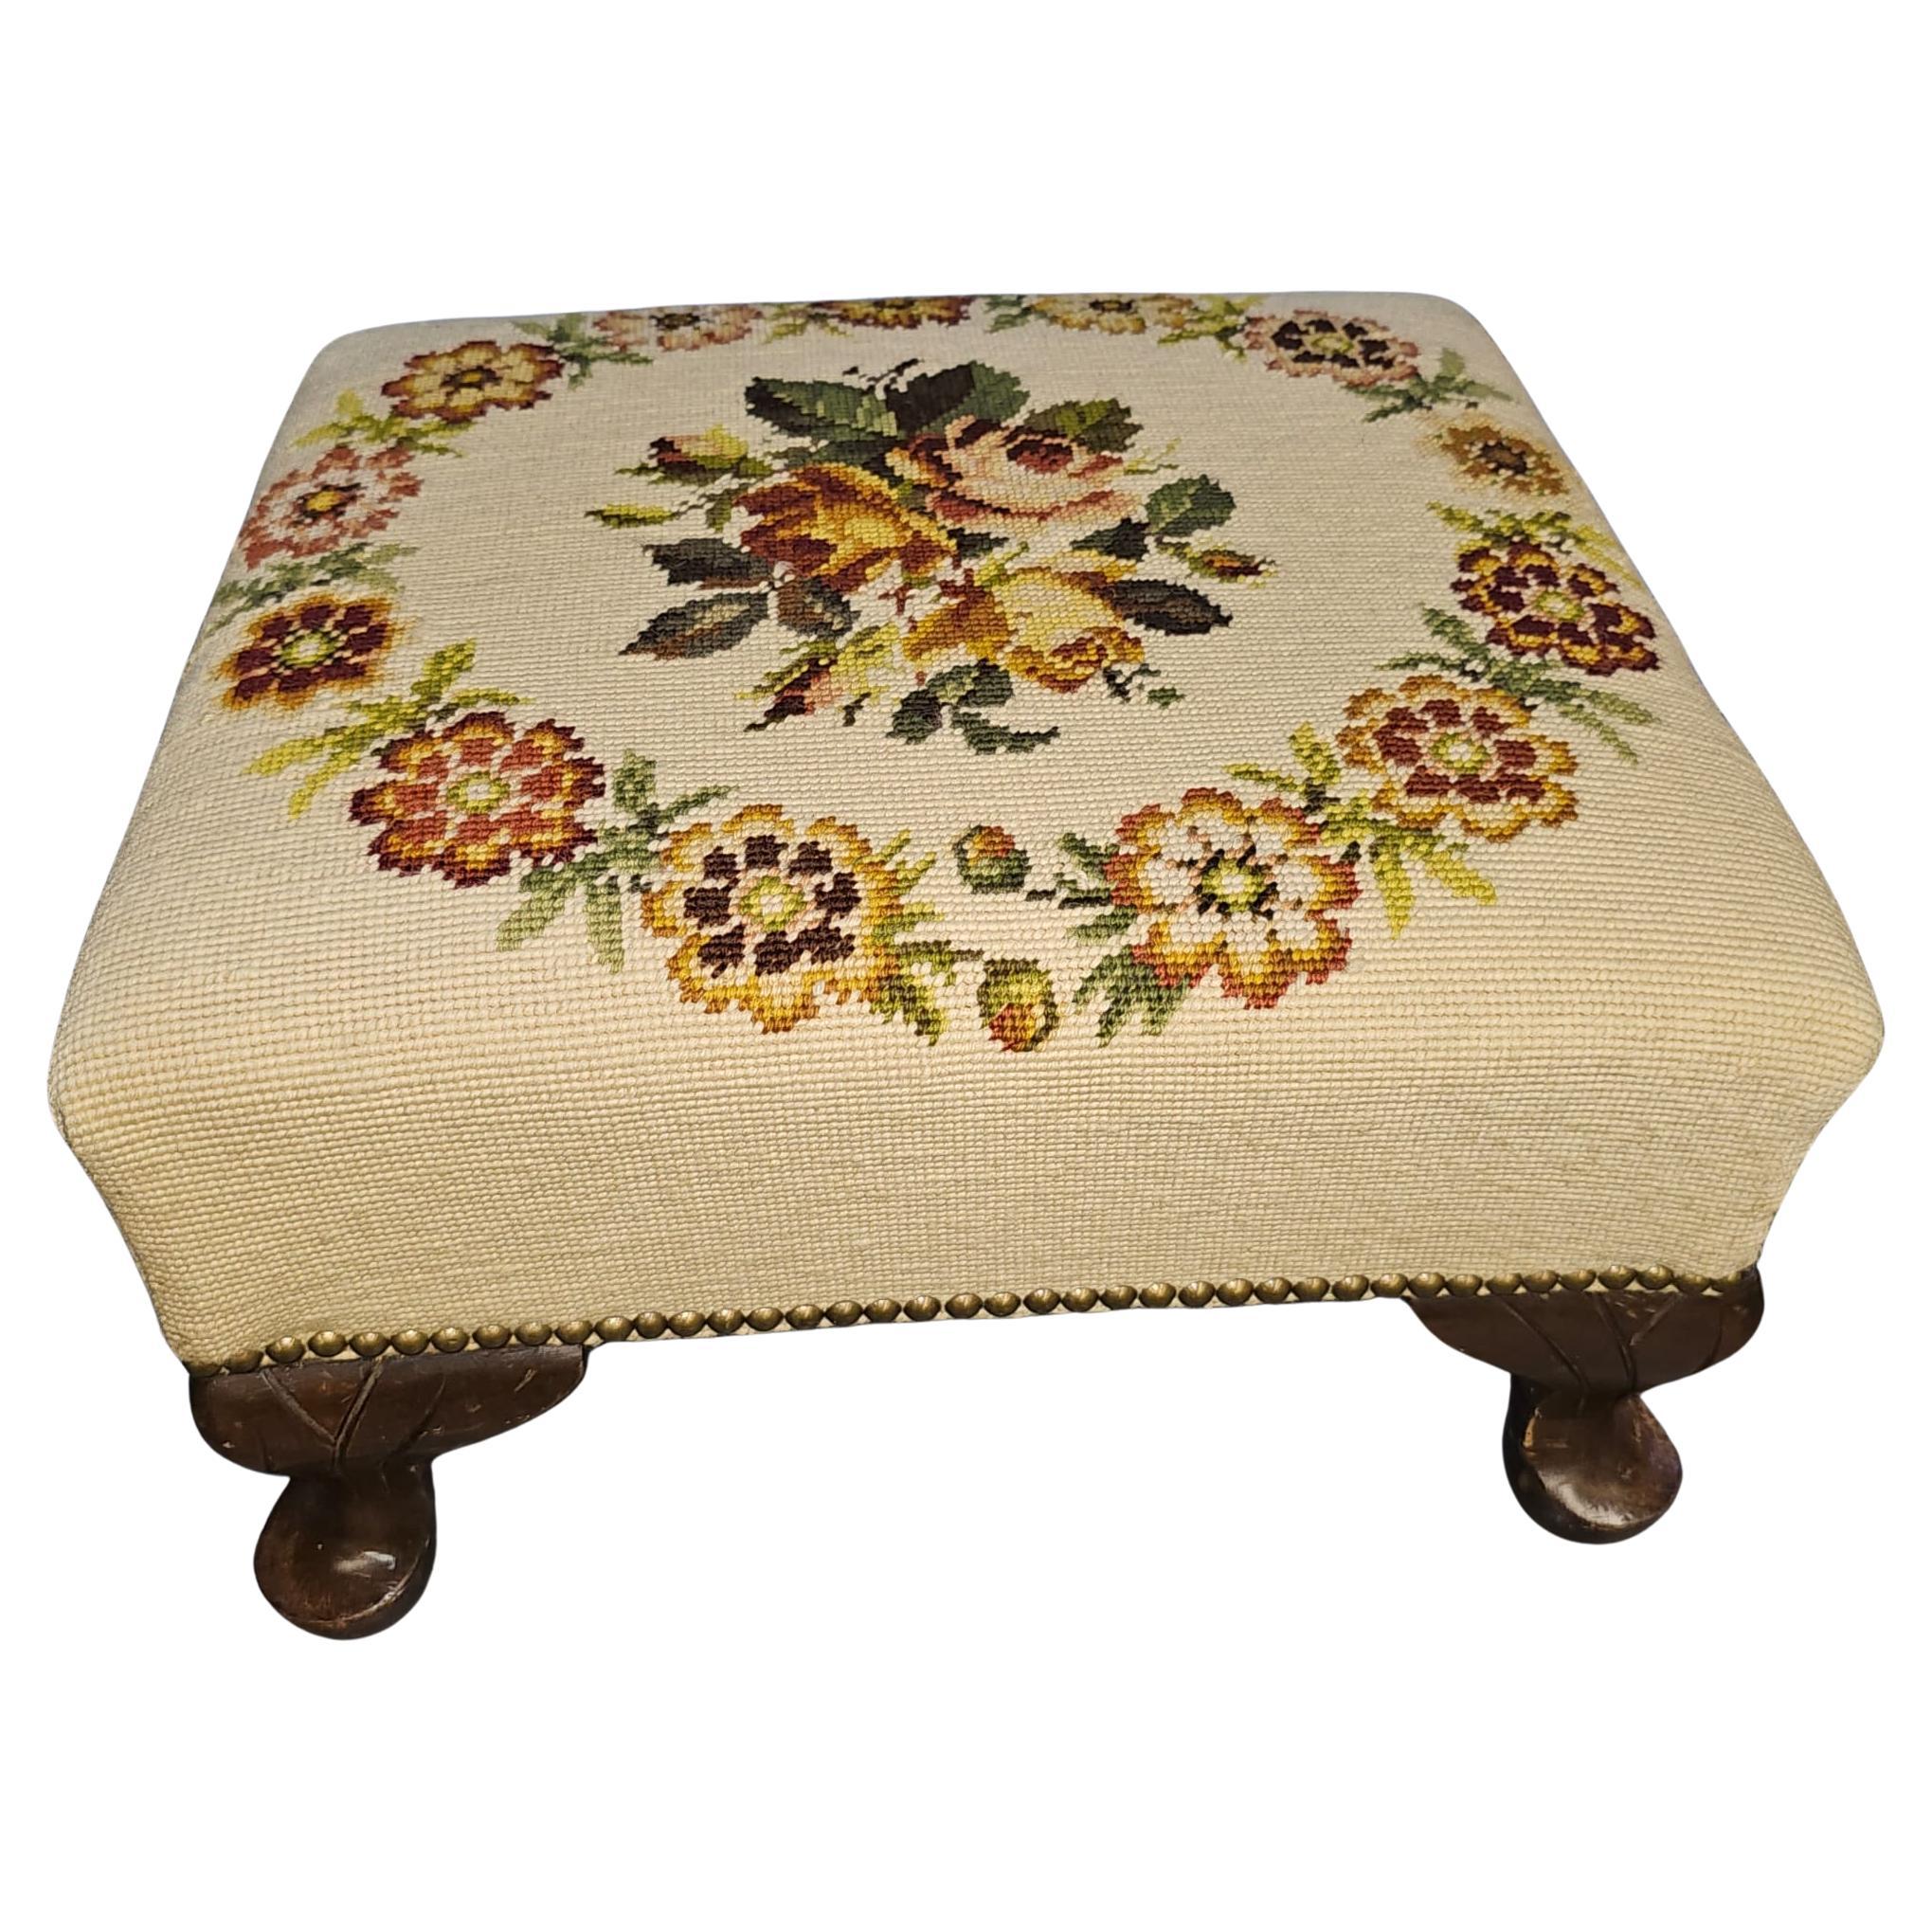 A Victorian Mahogany and light yellow Needlepoint Upholstered Footstool with brass nail studded.
Measures 16.5